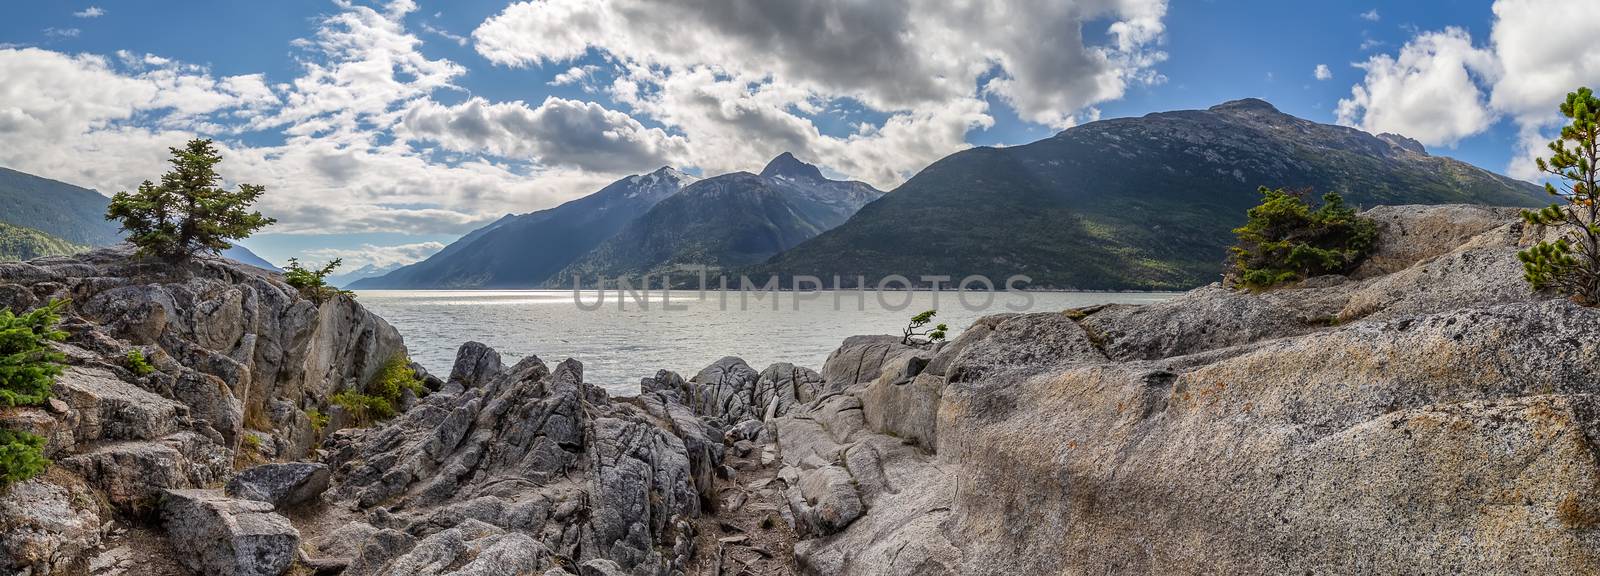 Panoramic shot from Yucatania point near Skagway, Alaska. Rocky terrain as a foreground. Mountains and cloudy blue sky as a background by DamantisZ